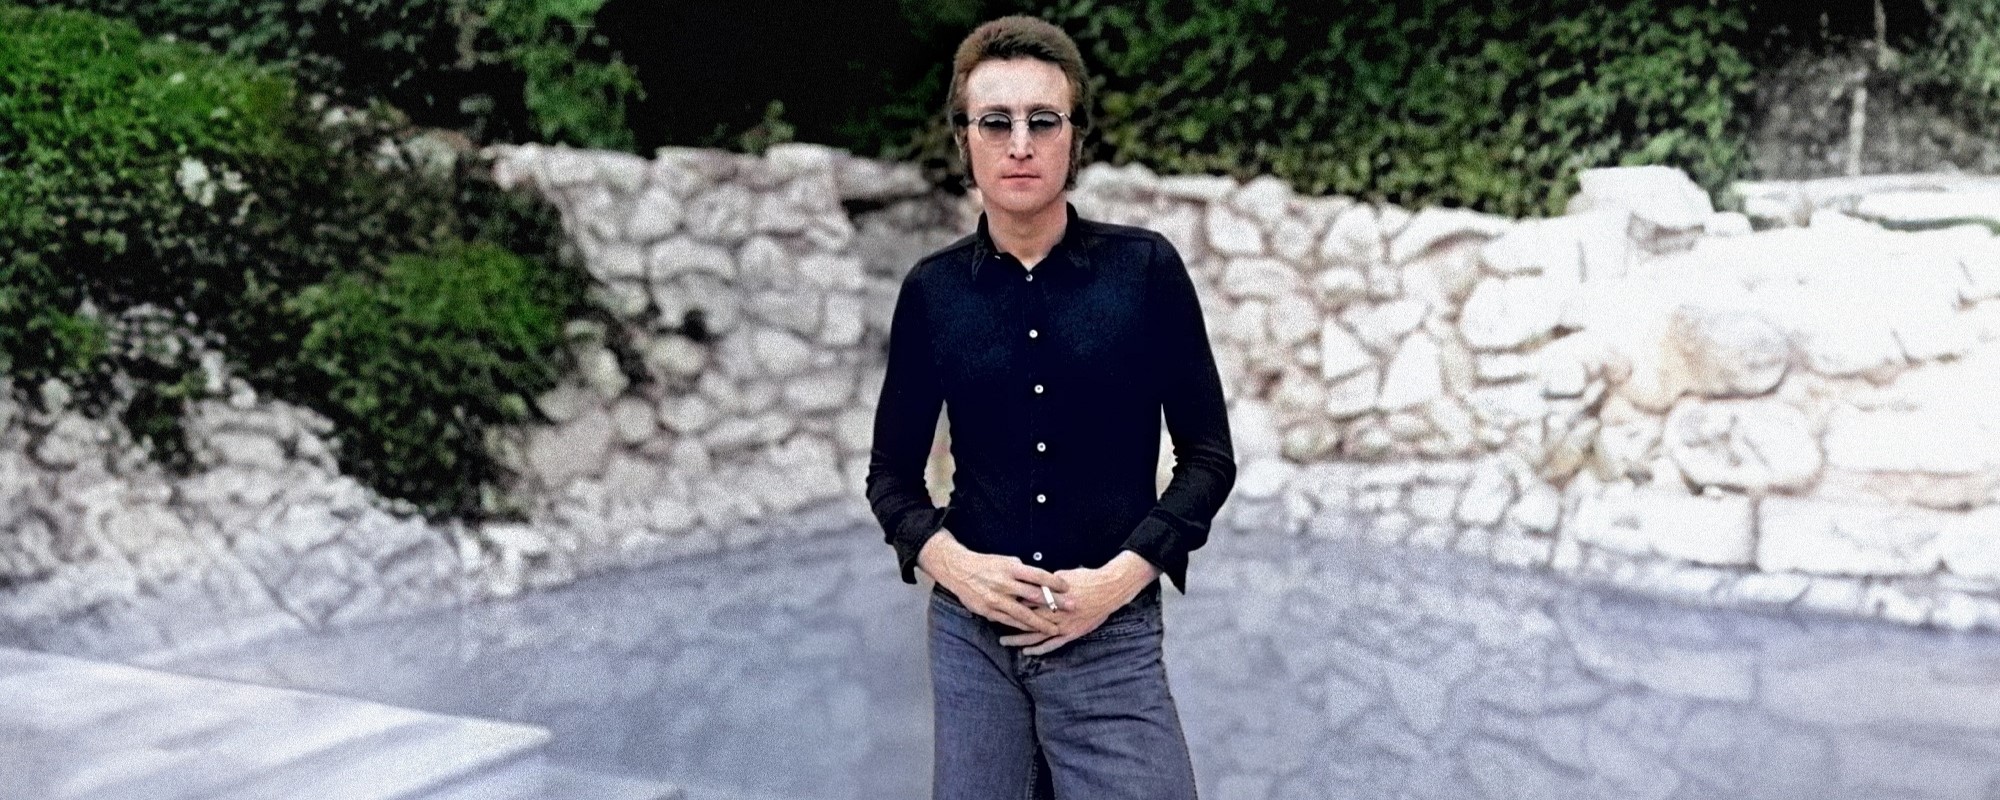 50th Anniversary Reissues of John Lennon’s ‘Mind Games’ Album Announced, Including Multifaceted Super Deluxe Box Set